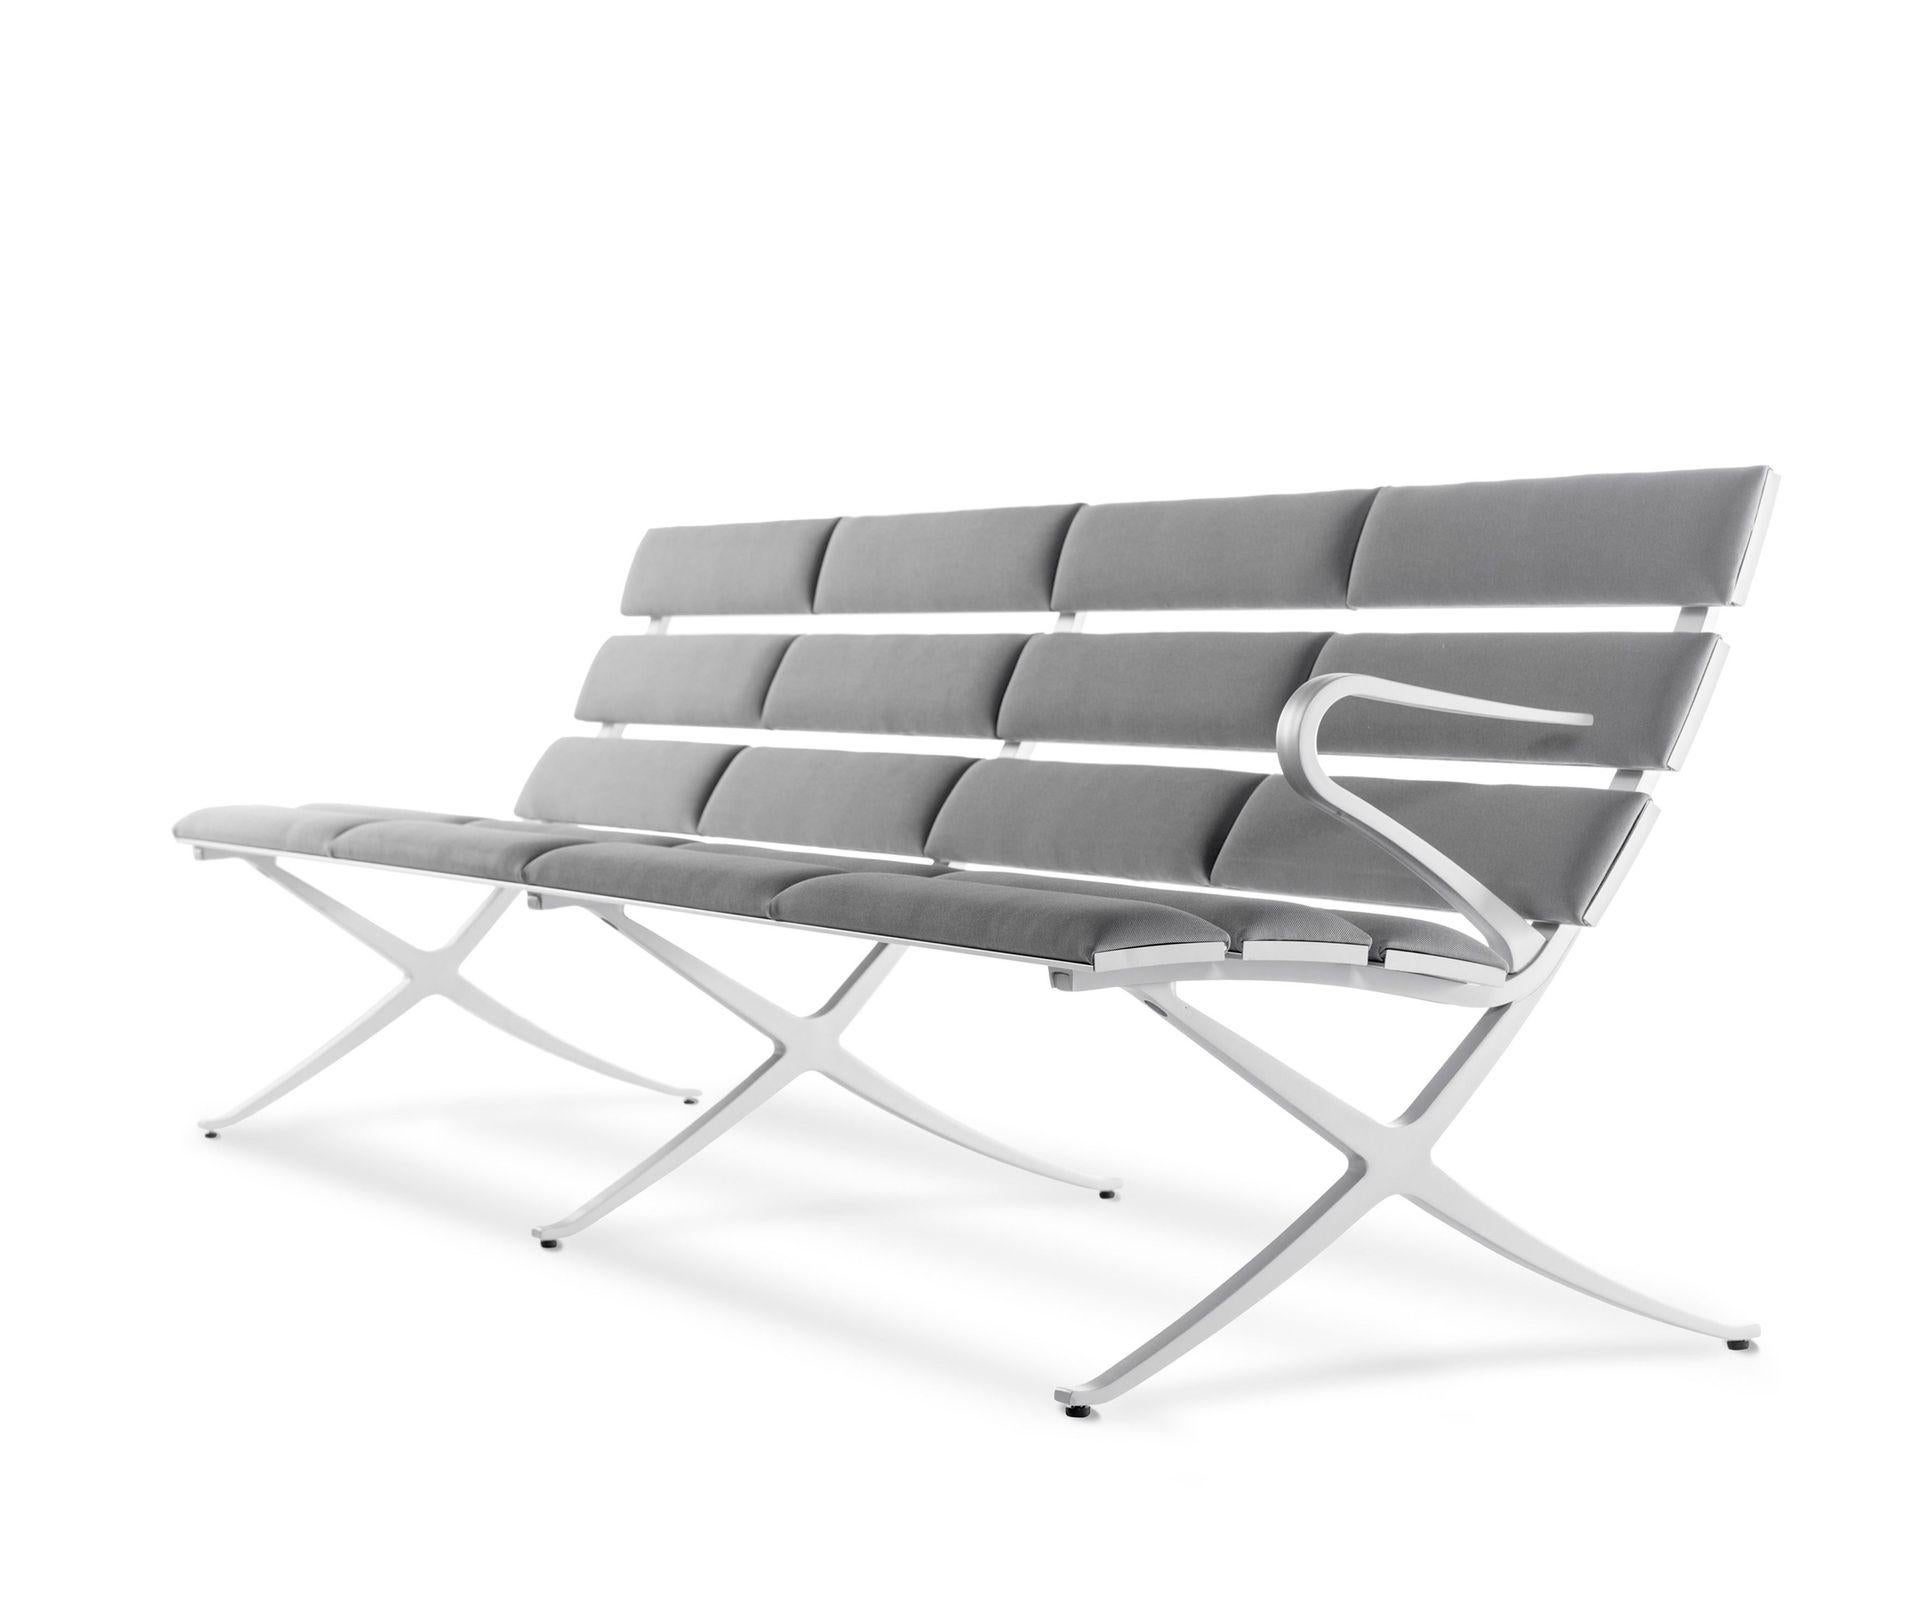 Bench B 4 seater by Konstantin Grcic.
Dimensions: D240 x 70 x H77 cm.
Materials: aluminium, optional upholstery.
Also available in different finishes. 

A bench that is made up of solid extruded aluminium lineal slats and cast aluminium